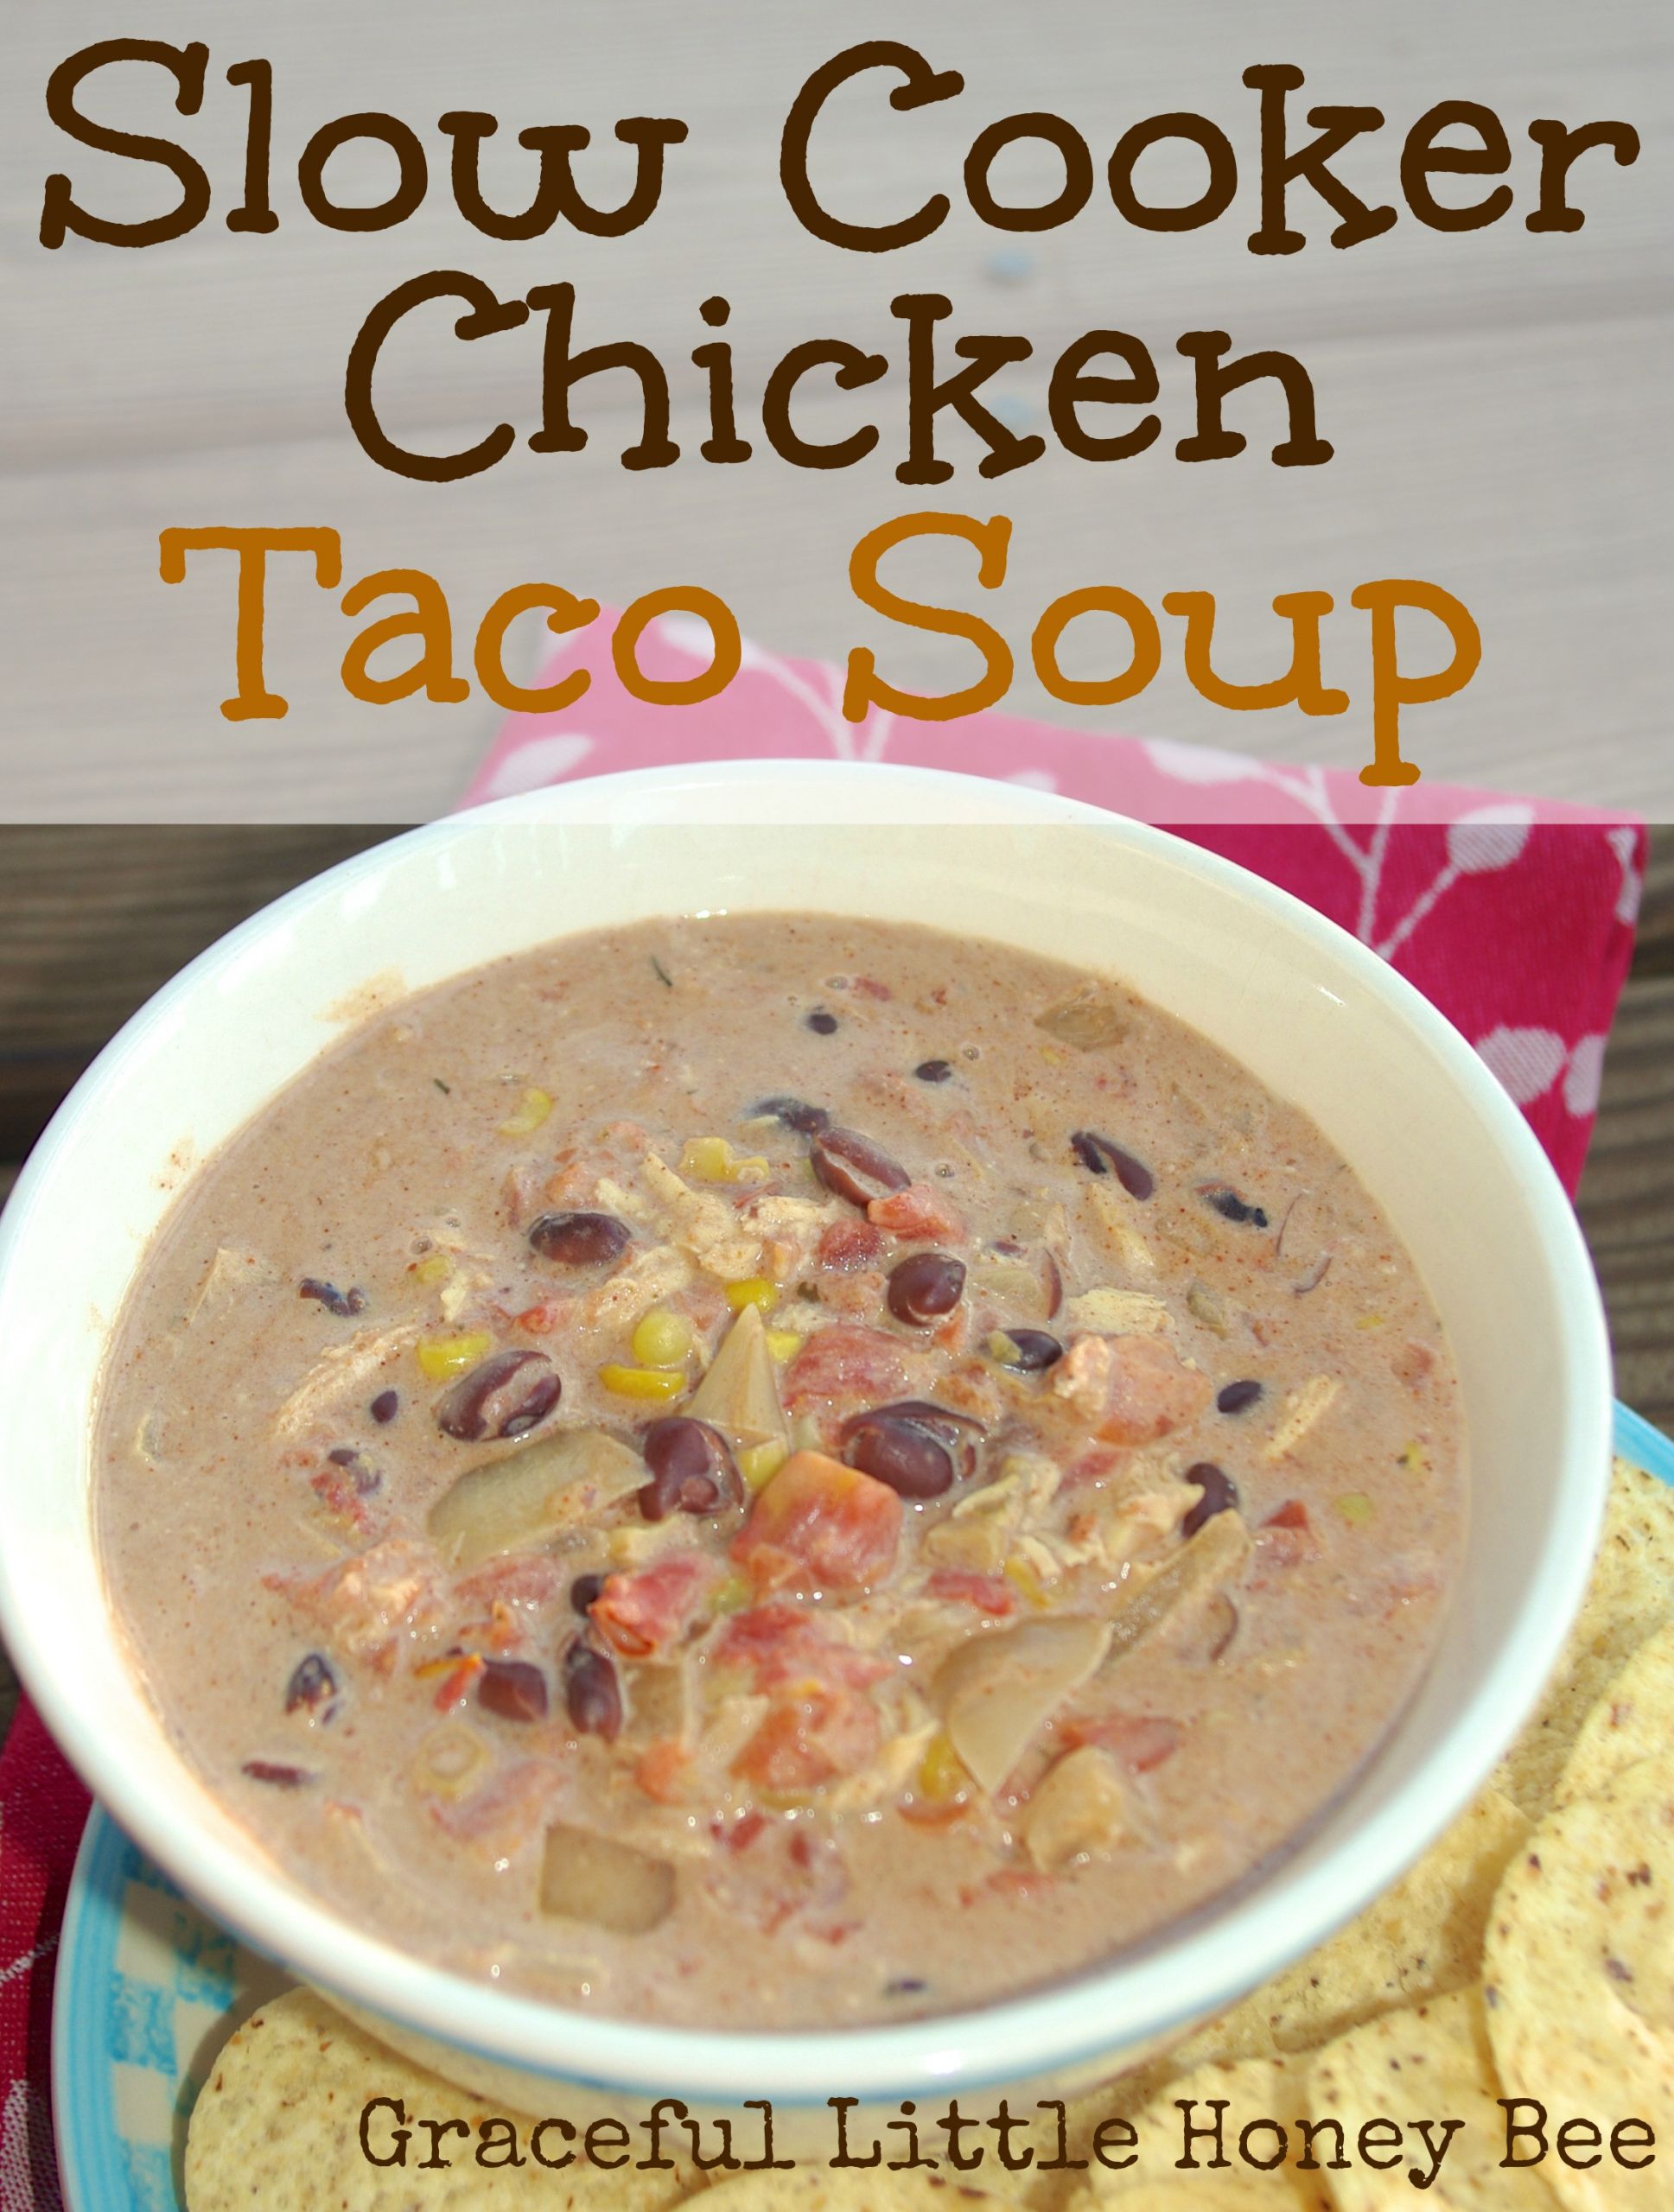 Chicken Taco Soup Slow Cooker
 Slow Cooker Chicken Taco Soup Graceful Little Honey Bee